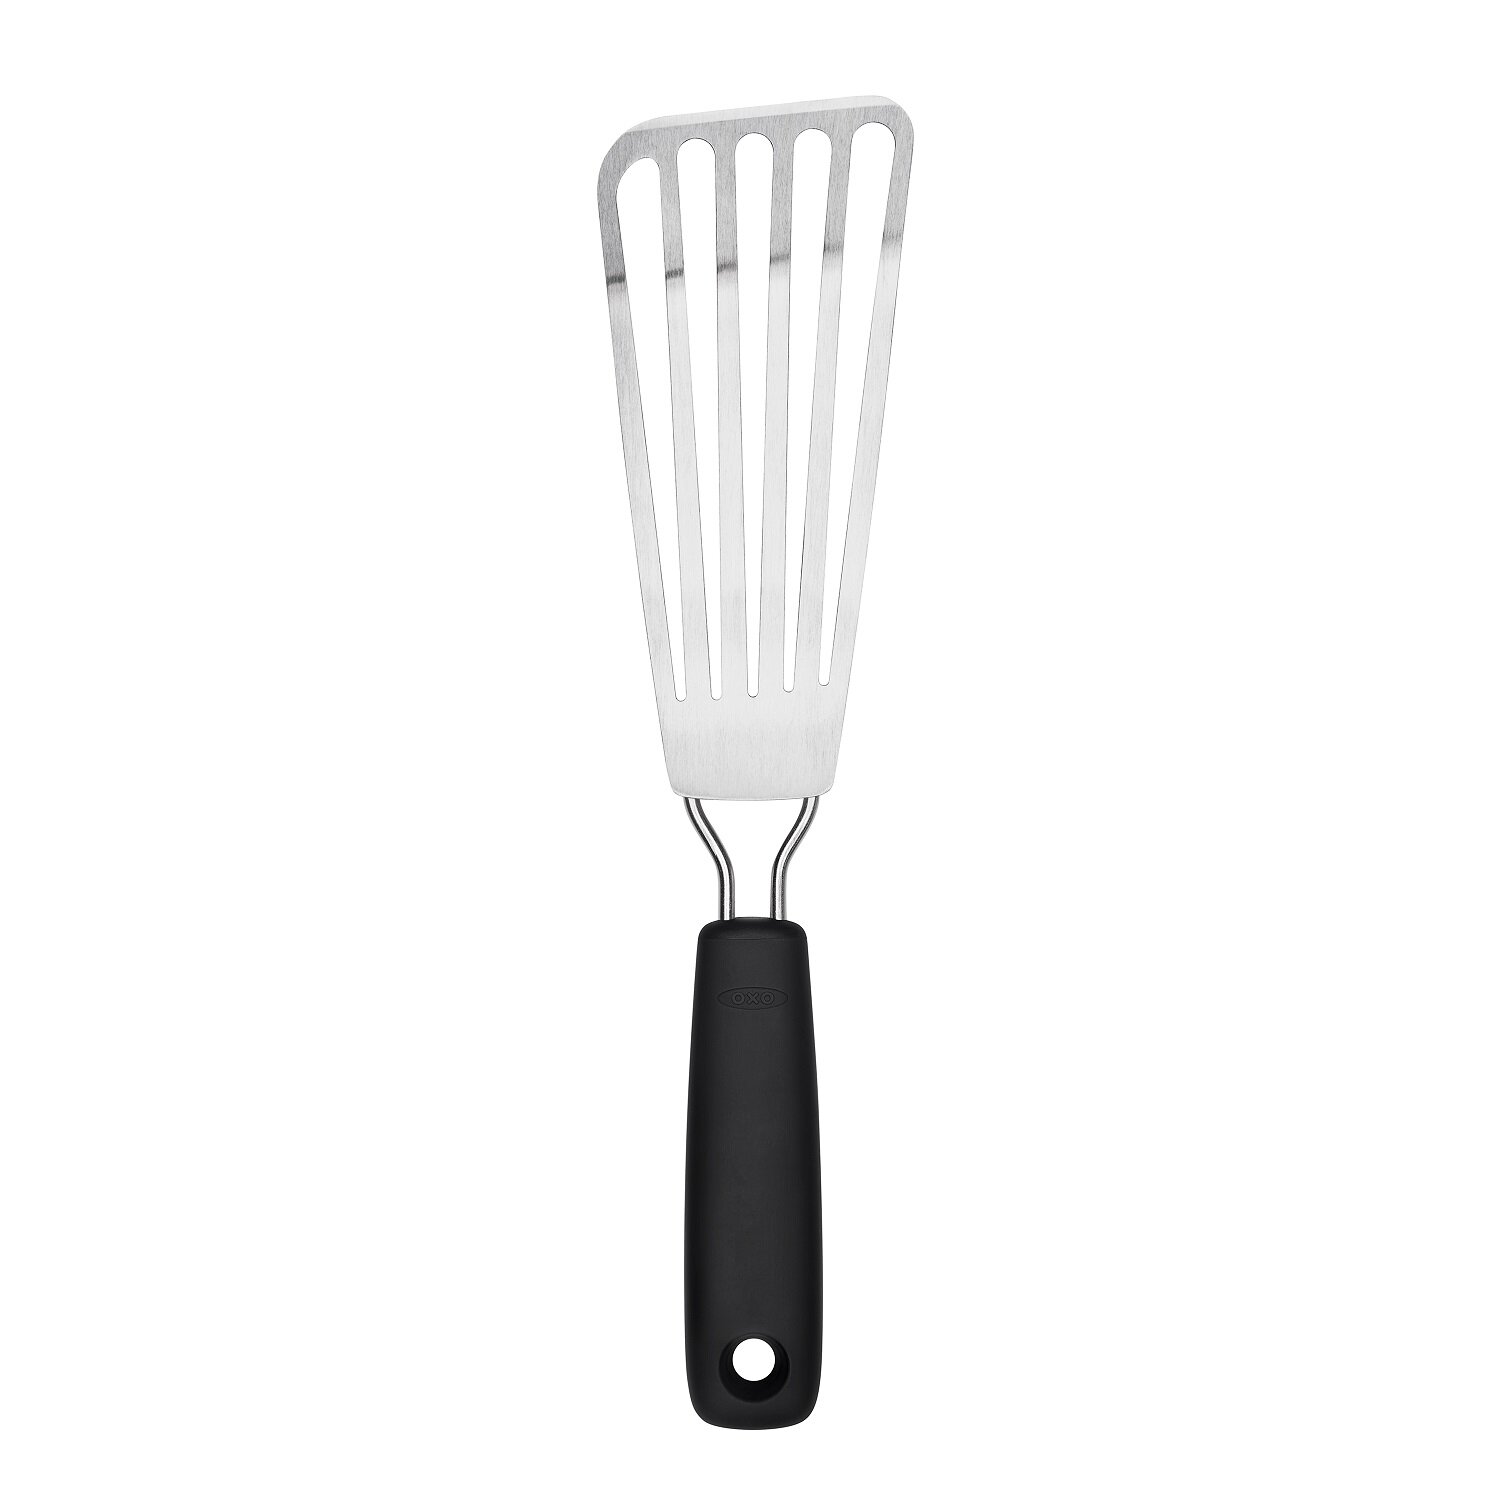 OXO Stainless Steel Fish Turner might be the best utensil for cast iron cookware